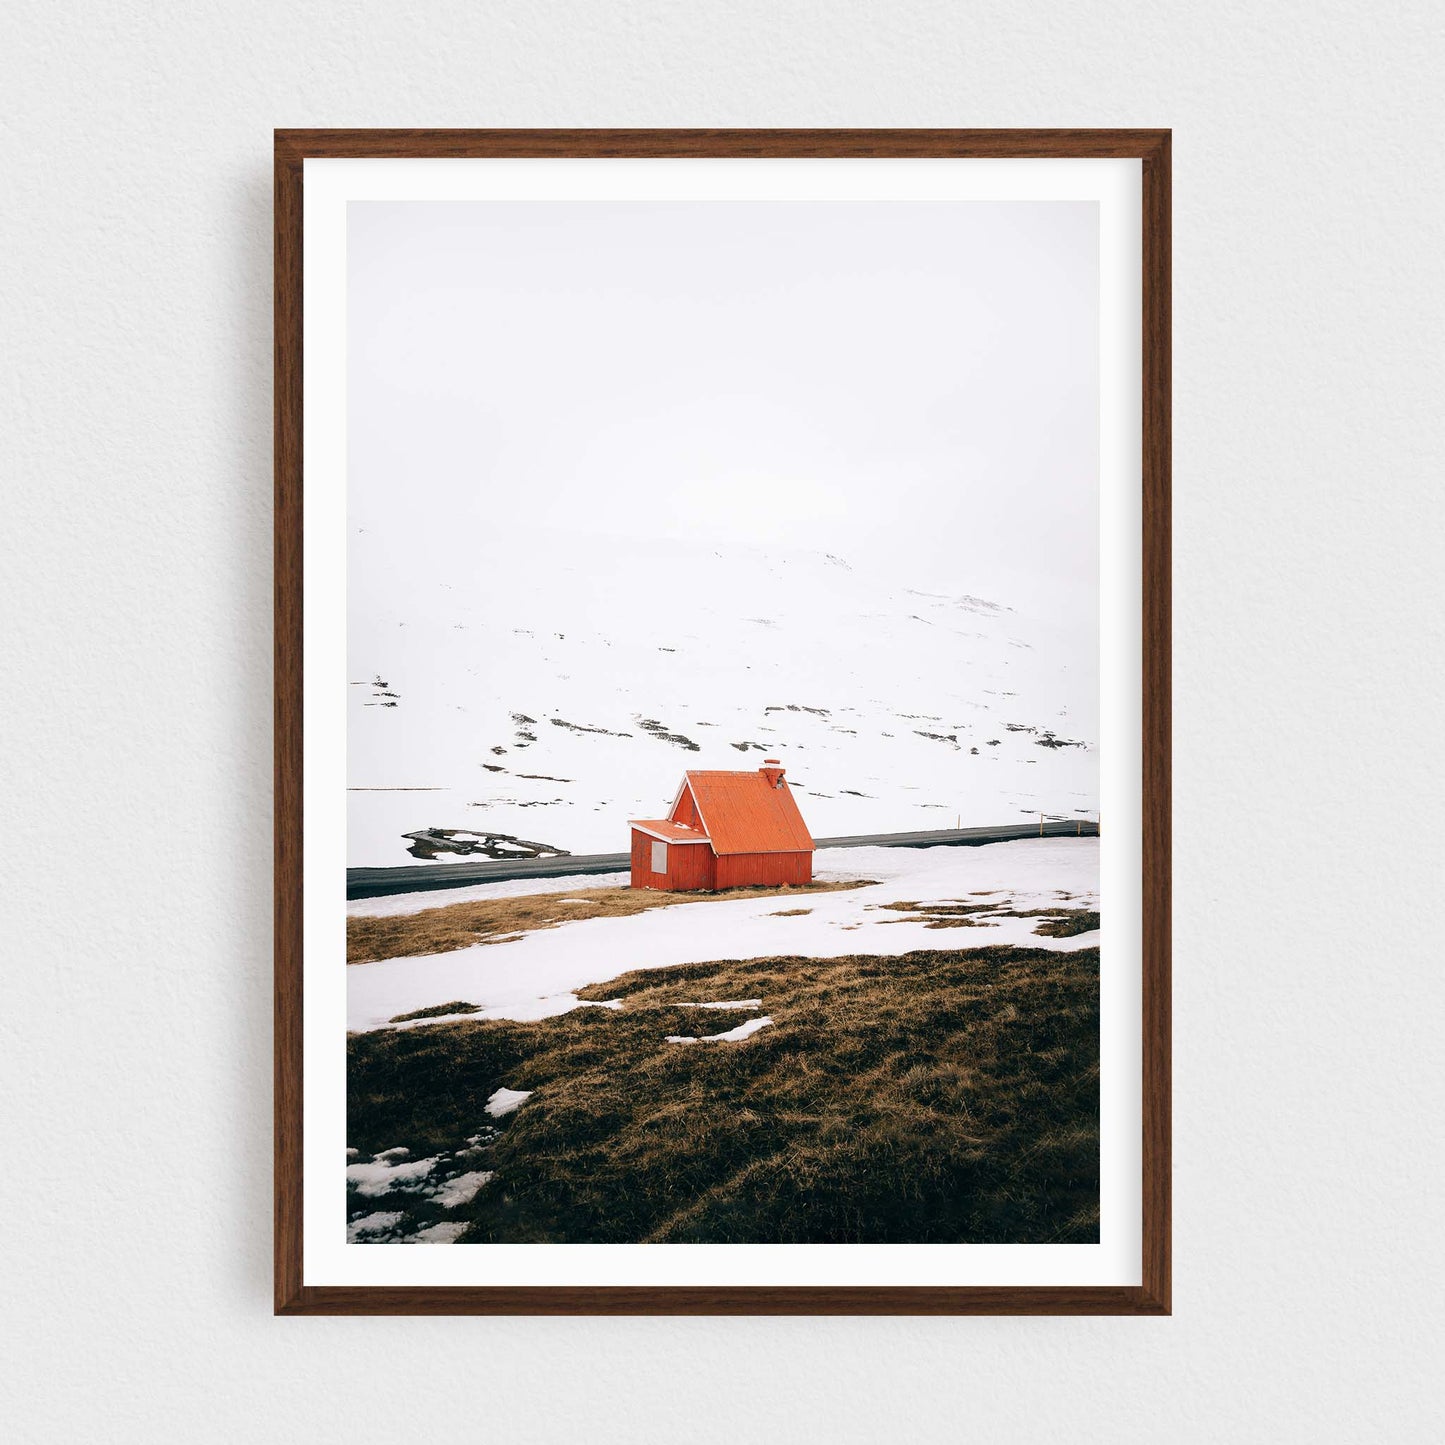 Iceland fine art photography print featuring a red cabin in winter, in a walnut frame